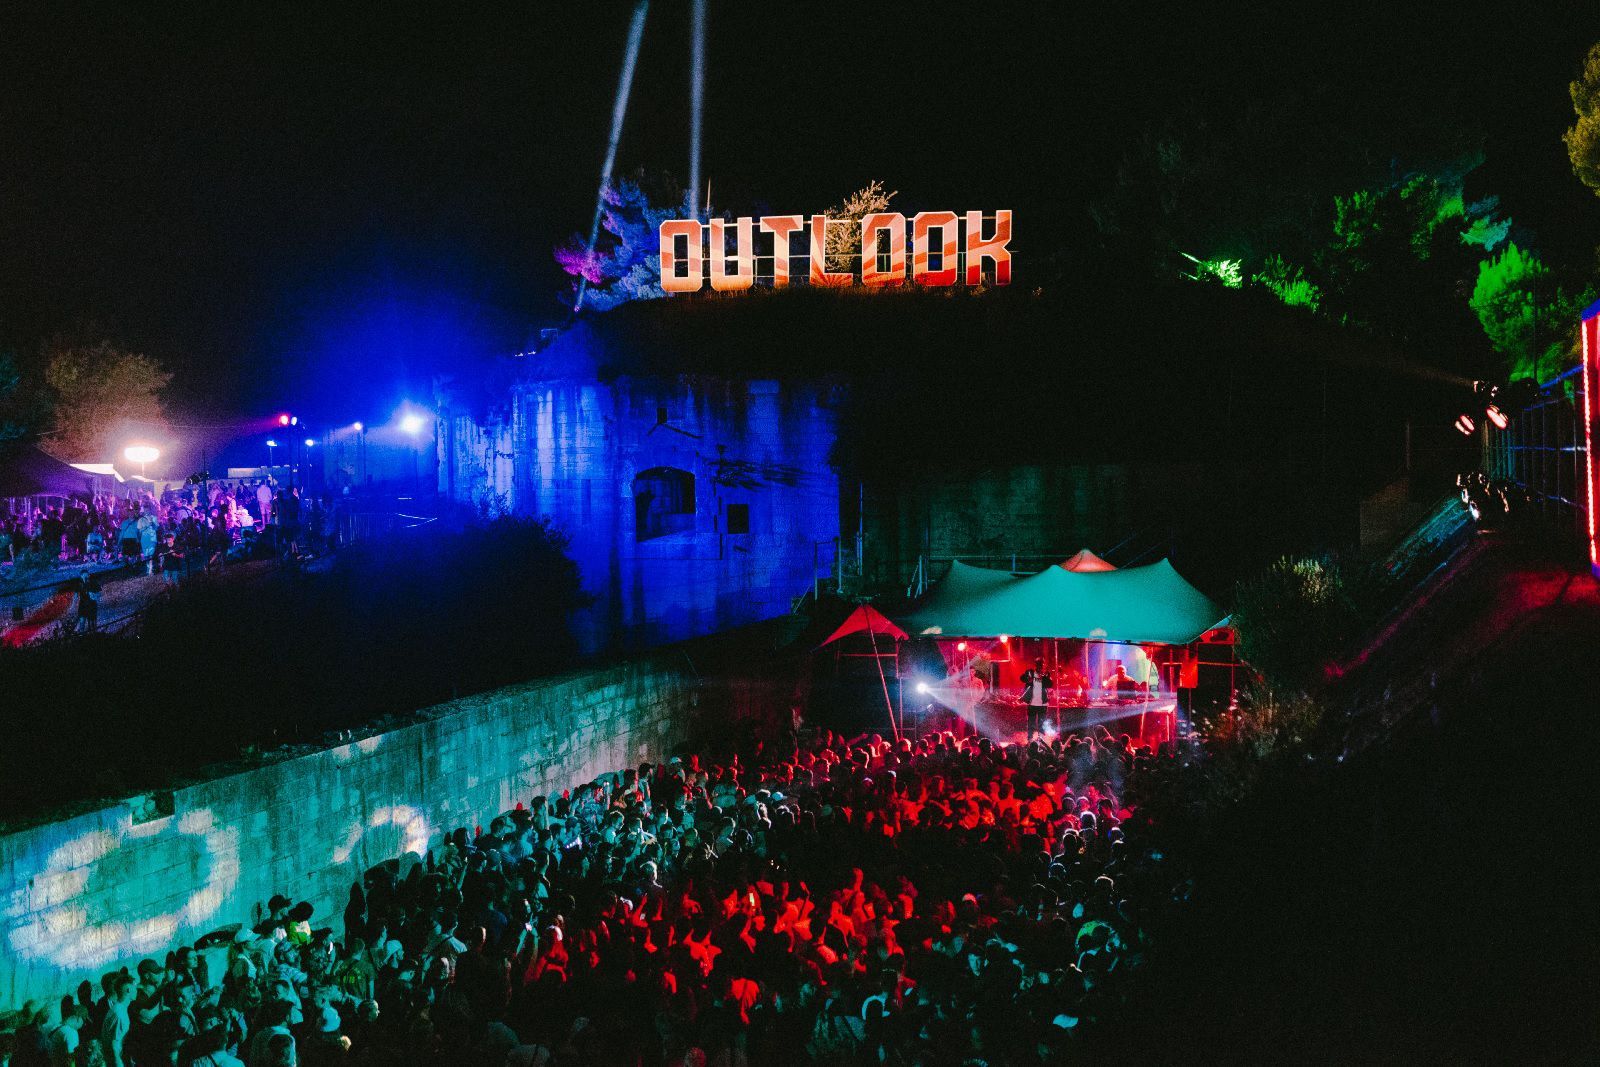 Get ready for the Outlook Festival, Europe's largest bass music festival Discover how to win to tickets for the anticipated Croatian event